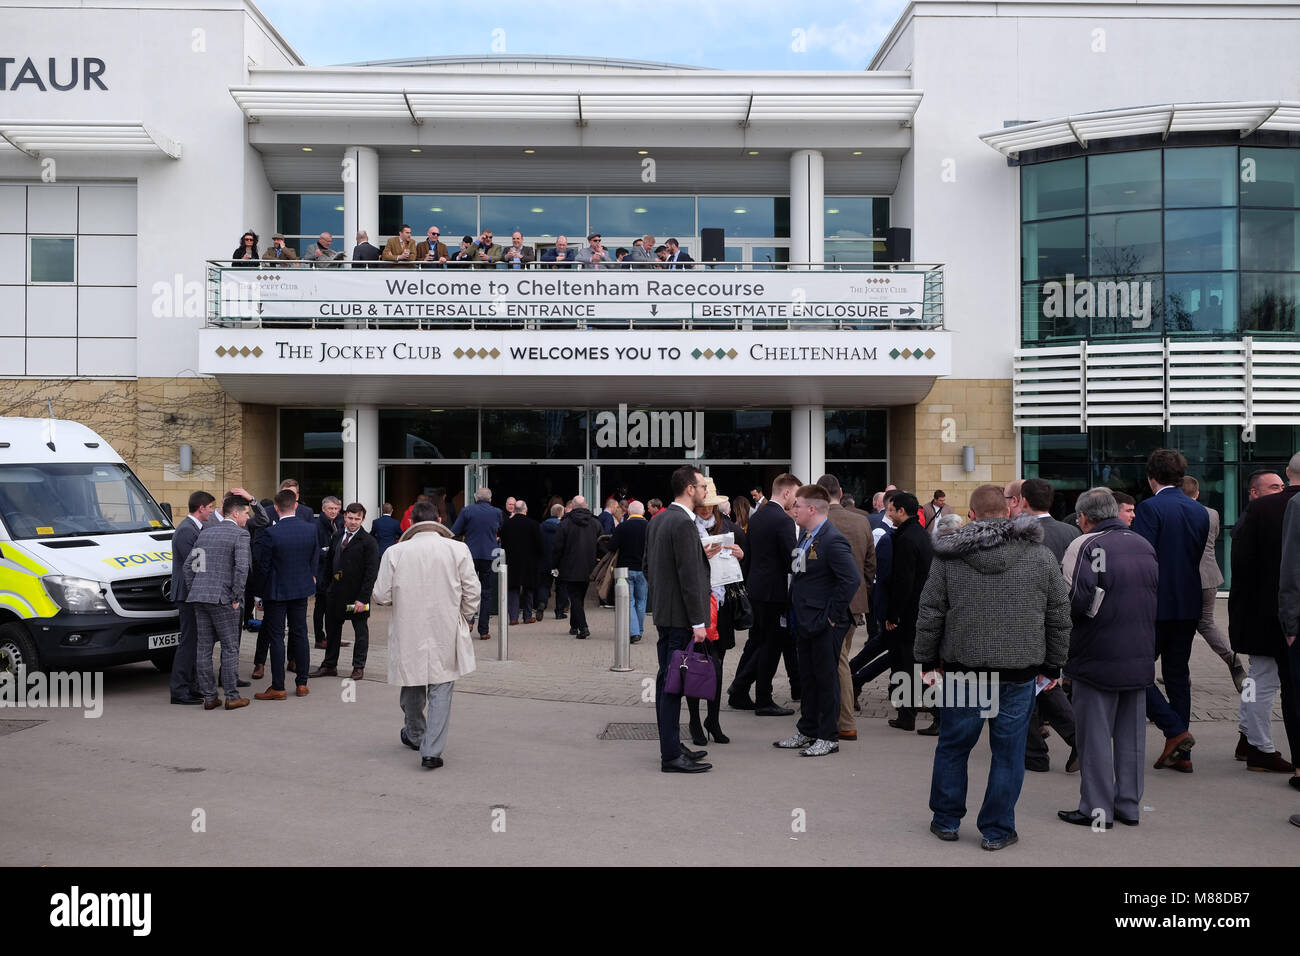 Cheltenham Festival, Gloucestershire, UK - Friday 16th March 2018 - Race goers arrive at the Cheltenham racing festival ahead of this afternoons classic Gold Cup race.  Steven May / Alamy Live News Stock Photo